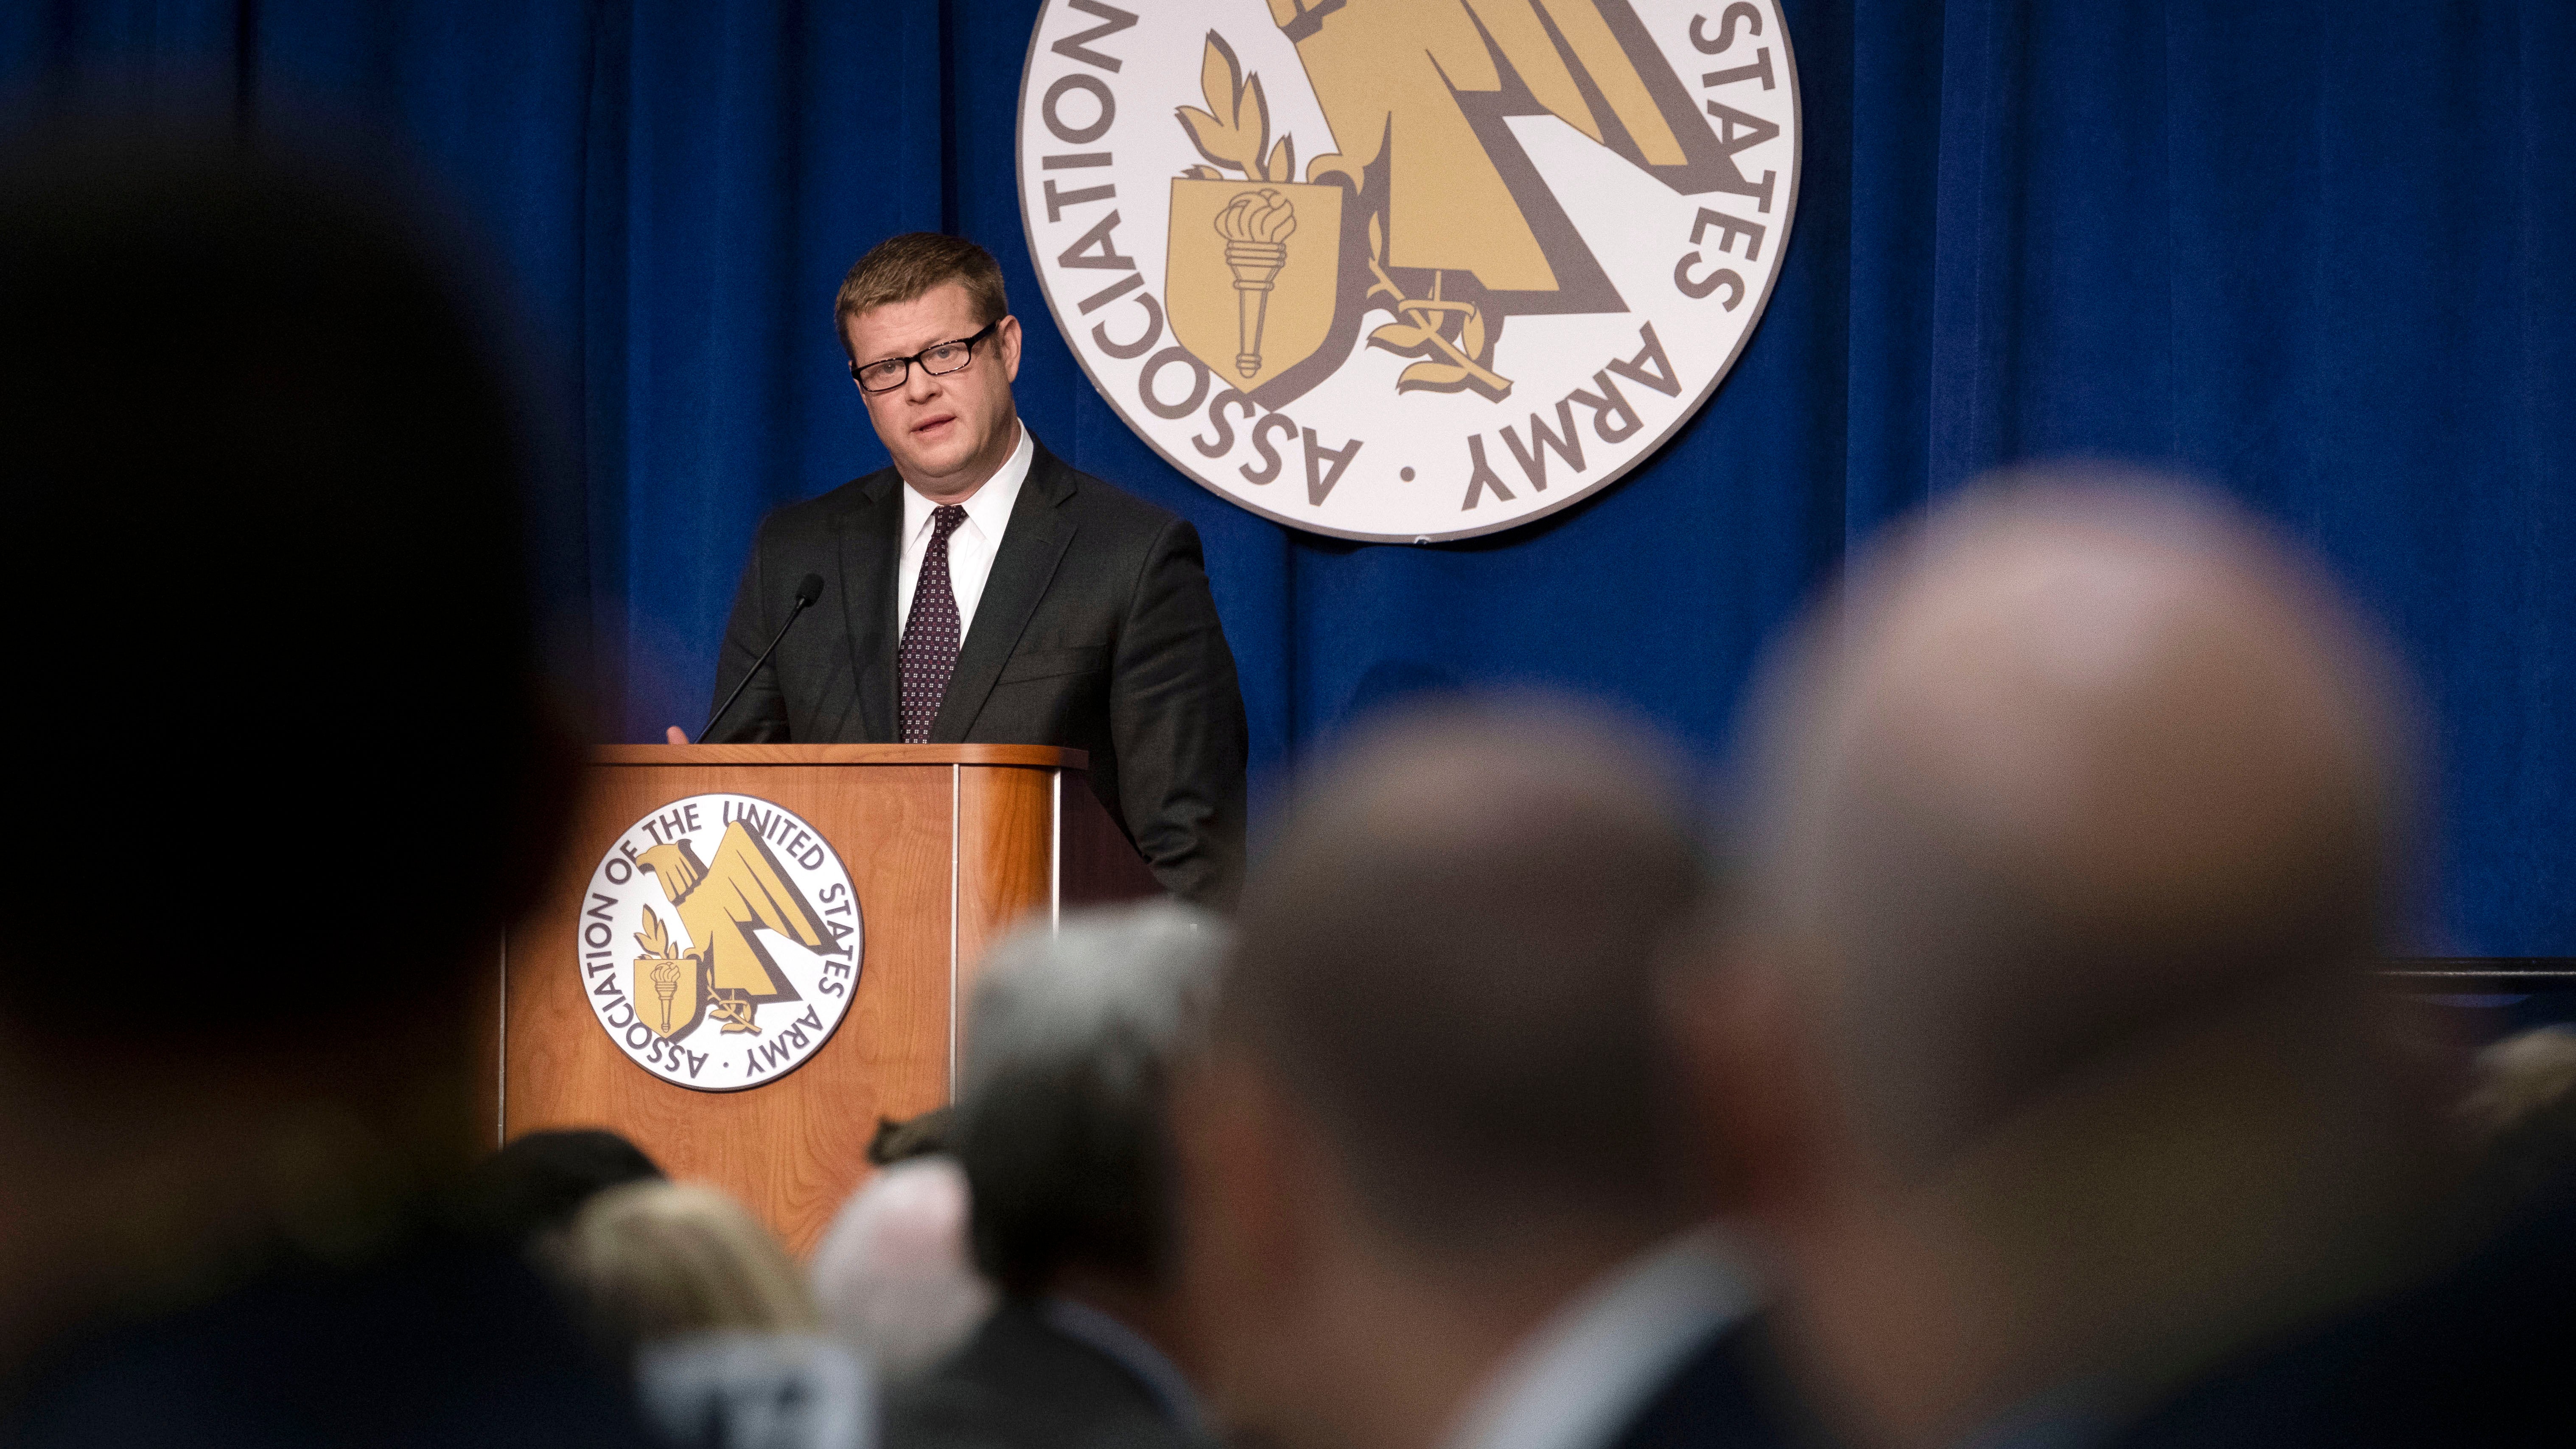 Secretary of the Army Ryan D. McCarthy addresses the Congressional Breakfast at the  2019 AUSA Annual Meeting and Exposition at the Washington Convention Center on Oct. 15, 2019.